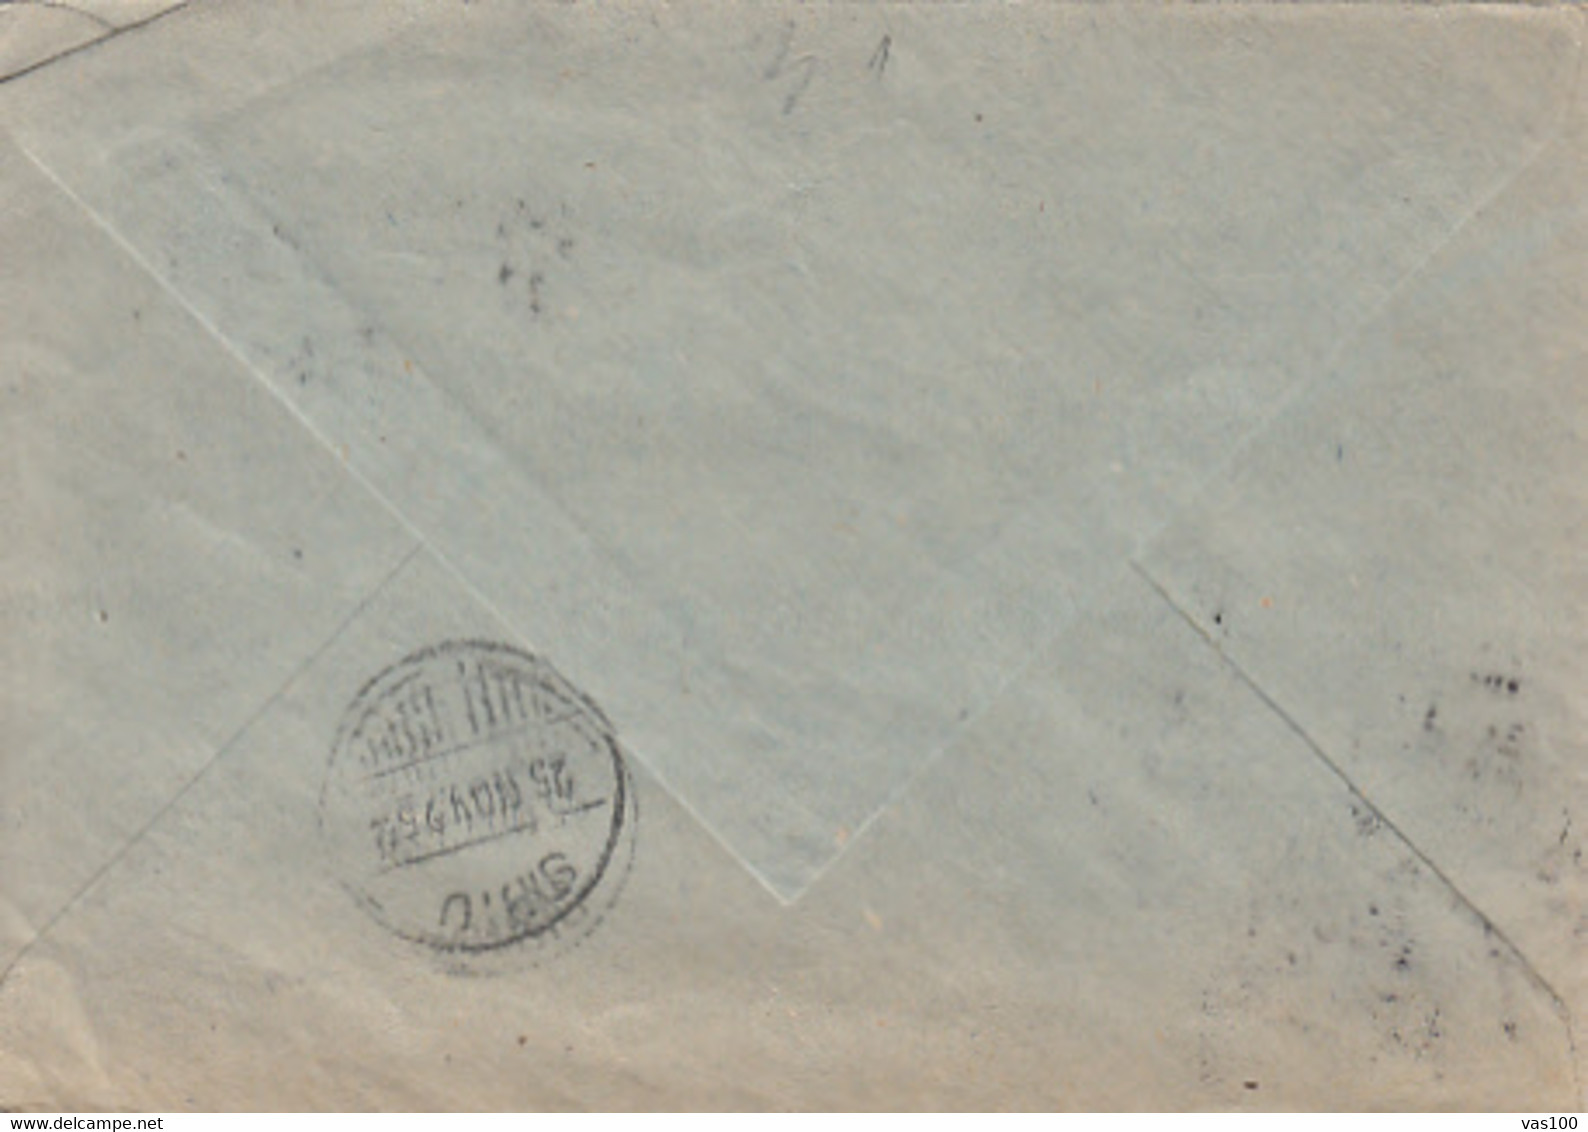 CIVIL MEDAL, STAMP ON REGISTERED MEDICAL SCIENCE SOCIETY HEADER COVER, 1952, ROMANIA - Covers & Documents